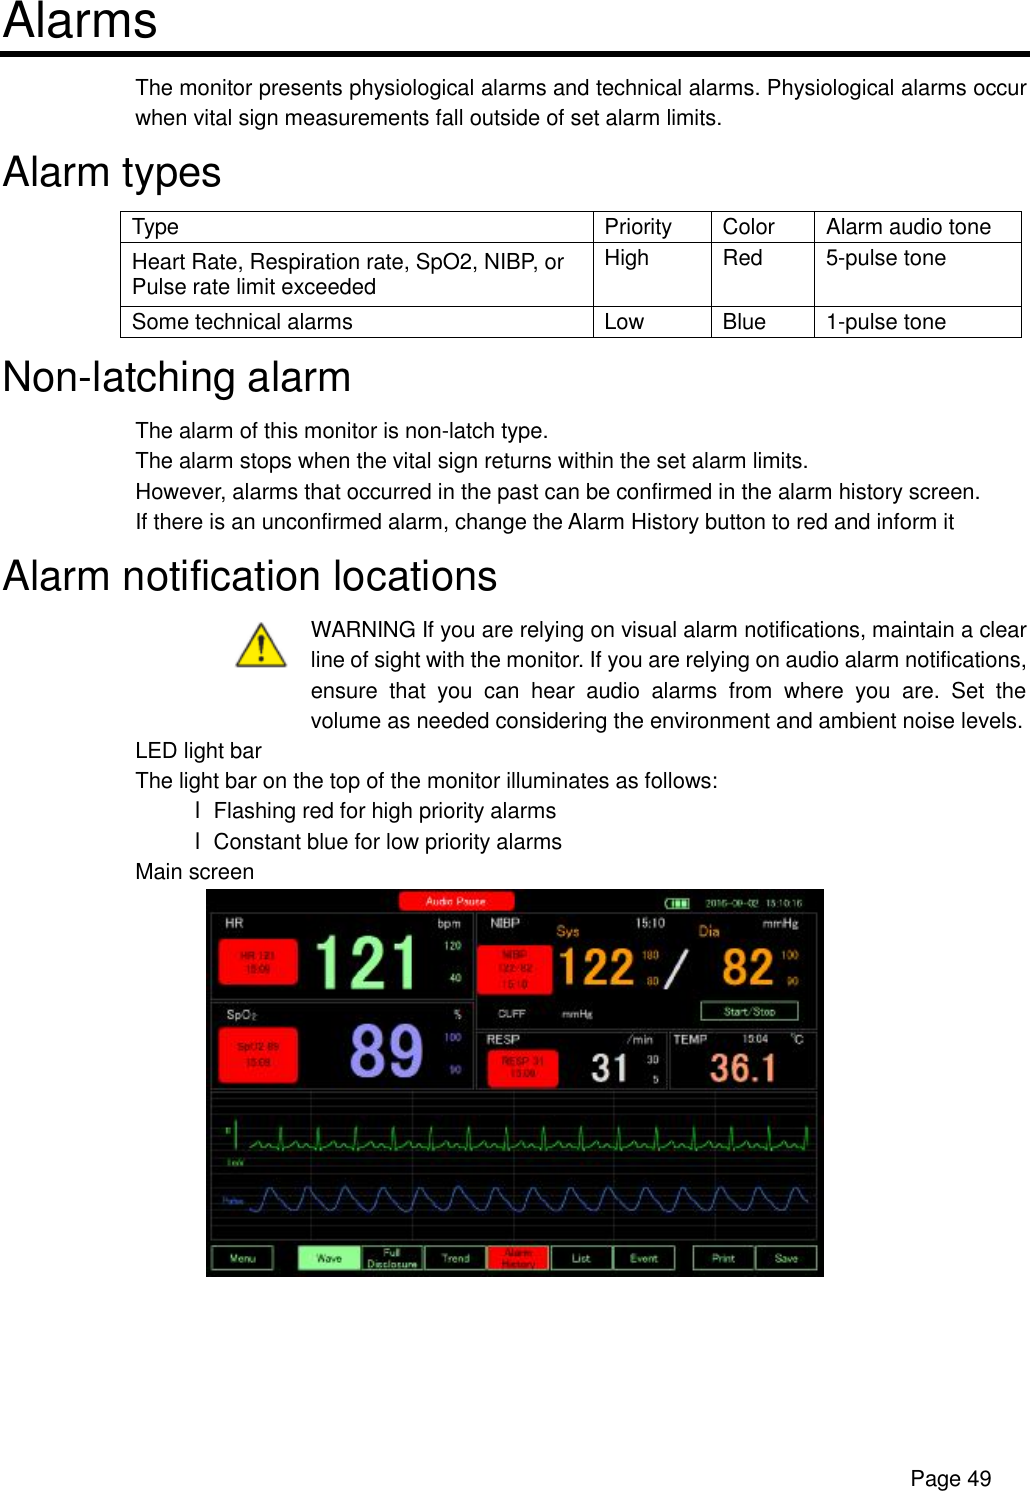      Page 49 Alarms The monitor presents physiological alarms and technical alarms. Physiological alarms occur when vital sign measurements fall outside of set alarm limits. Alarm types Type  Priority  Color  Alarm audio tone Heart Rate, Respiration rate, SpO2, NIBP, or Pulse rate limit exceeded High  Red  5-pulse tone Some technical alarms  Low  Blue  1-pulse tone Non-latching alarm The alarm of this monitor is non-latch type. The alarm stops when the vital sign returns within the set alarm limits. However, alarms that occurred in the past can be confirmed in the alarm history screen. If there is an unconfirmed alarm, change the Alarm History button to red and inform it Alarm notification locations  WARNING If you are relying on visual alarm notifications, maintain a clear line of sight with the monitor. If you are relying on audio alarm notifications, ensure that you can hear audio alarms from where you are. Set the volume as needed considering the environment and ambient noise levels. LED light bar The light bar on the top of the monitor illuminates as follows: l Flashing red for high priority alarms l Constant blue for low priority alarms Main screen  